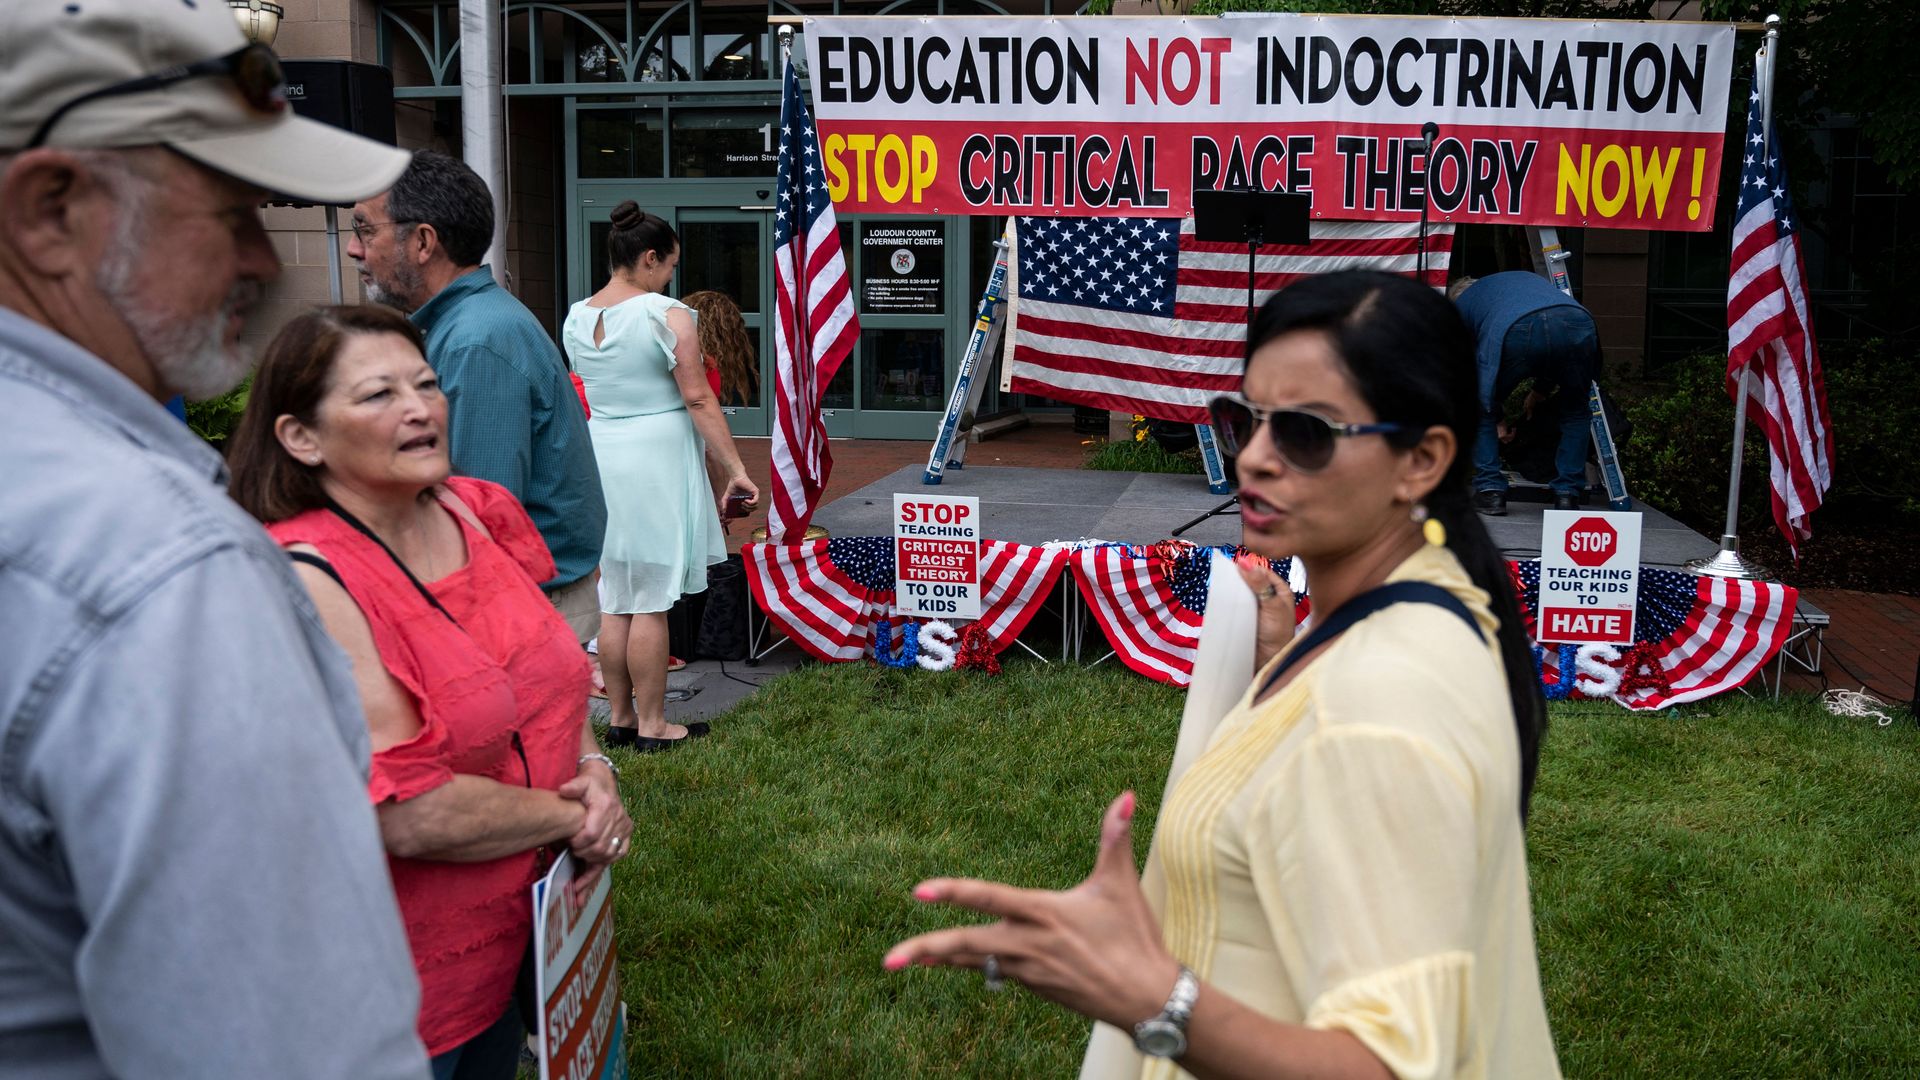 People talk before the start of a rally against "critical race theory" (CRT) being taught in schools at the Loudoun County Government center in Leesburg, Virginia.